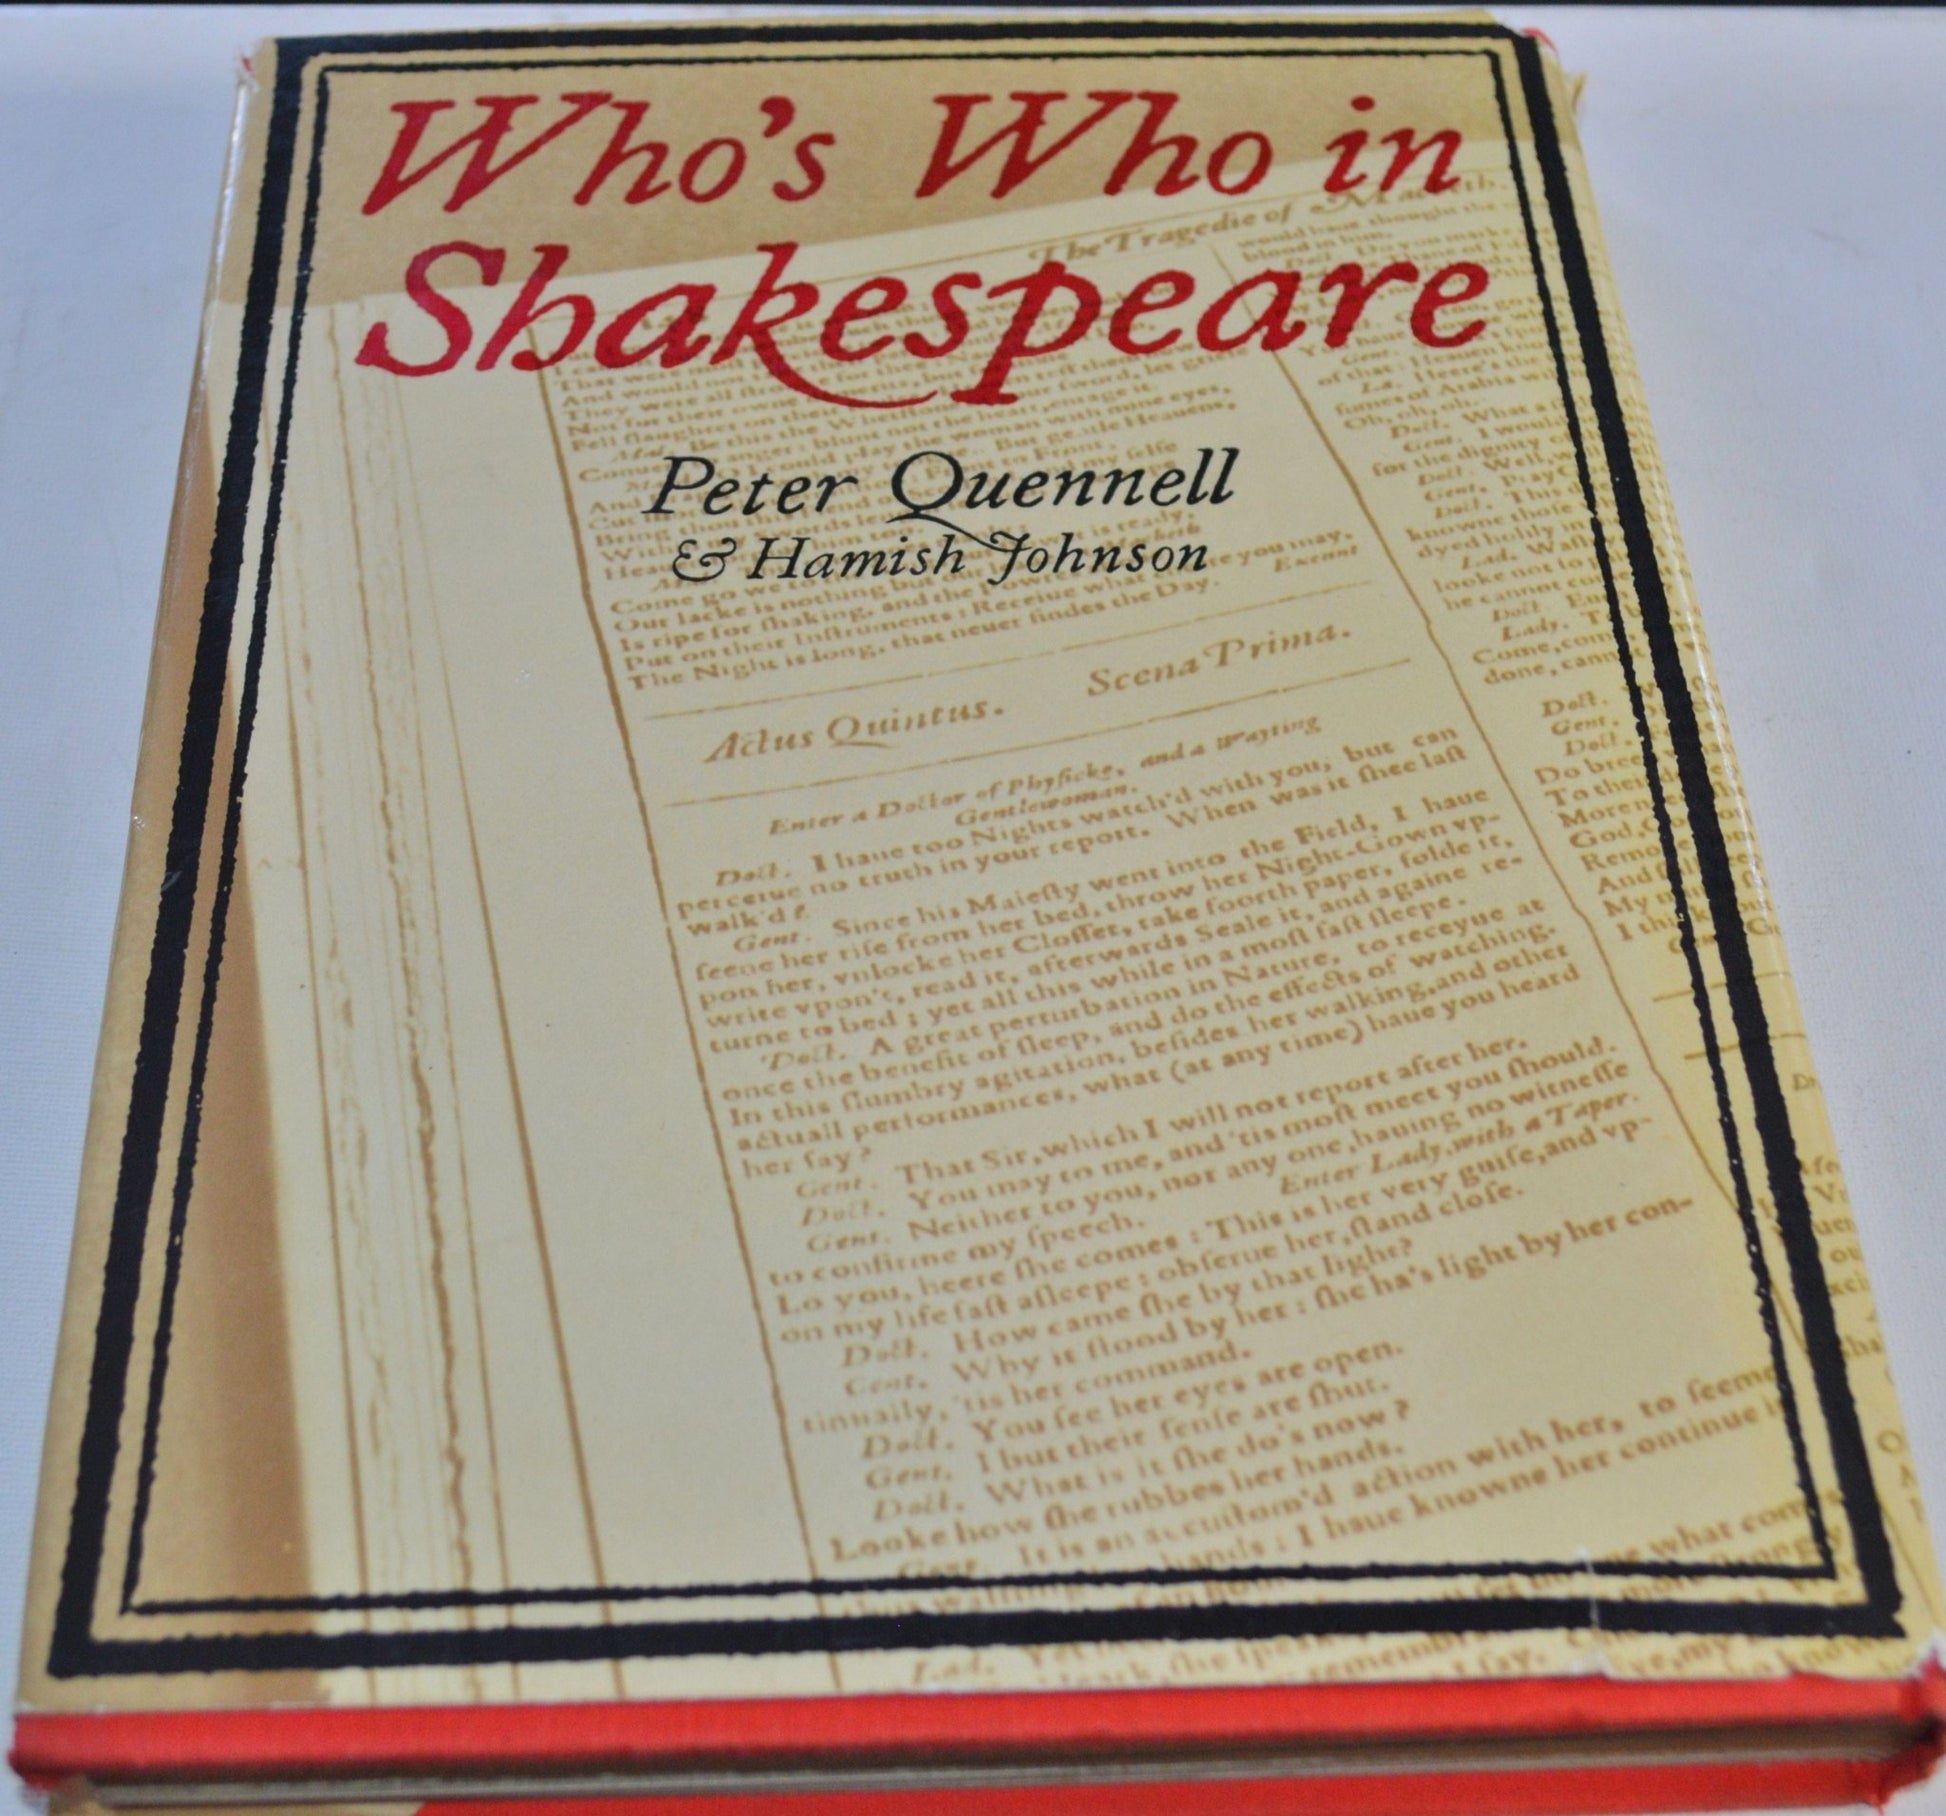 SECONDHAND BOOK WHO’S WHO IN SHAKESPEARE by PETER QUENNELL & HAMISH JOHNSON(PREVIOUSLY OWNED)GOOD CONDITION - TMD167207